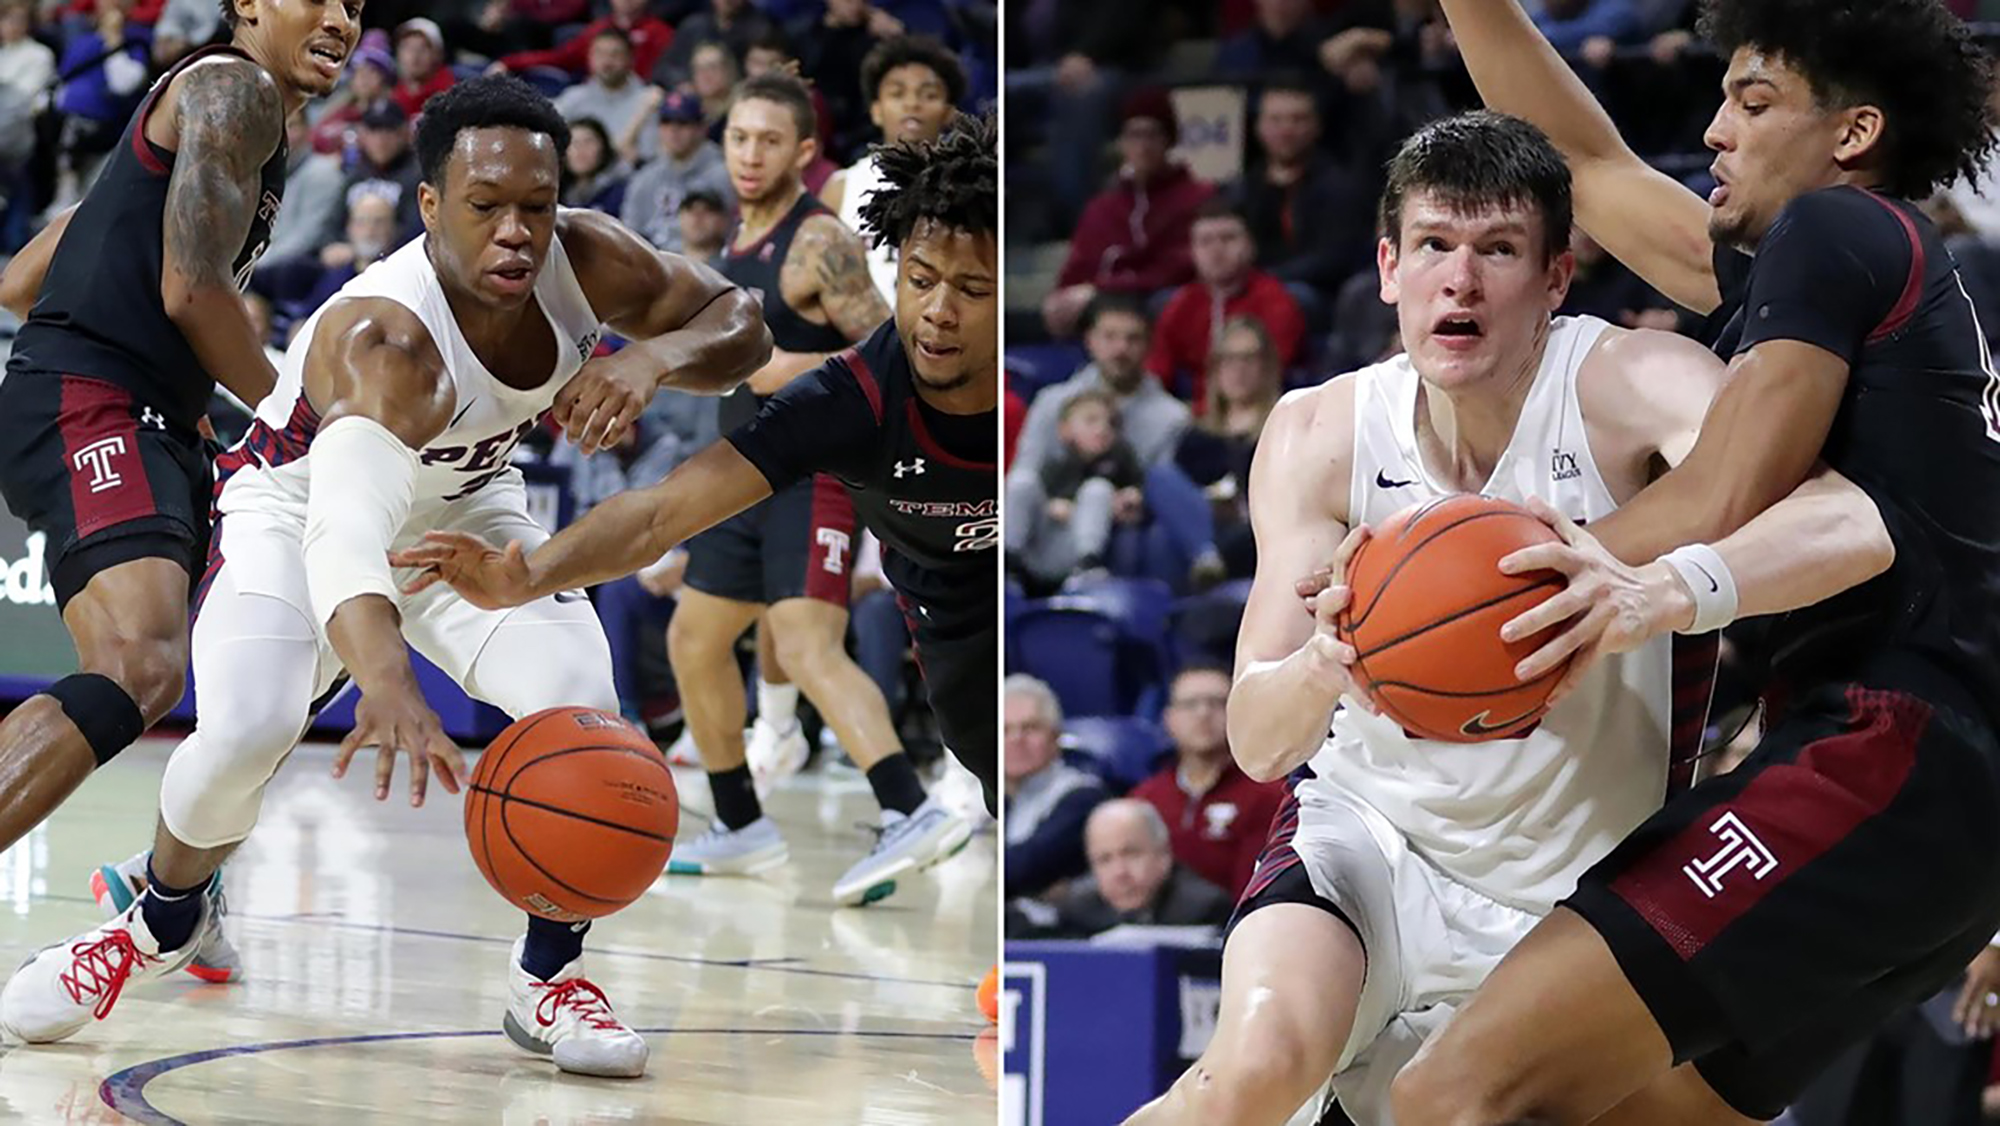 Two images slice together of Jordan Dingle and A.J. Brodeur playing against Temple at the Palestra.